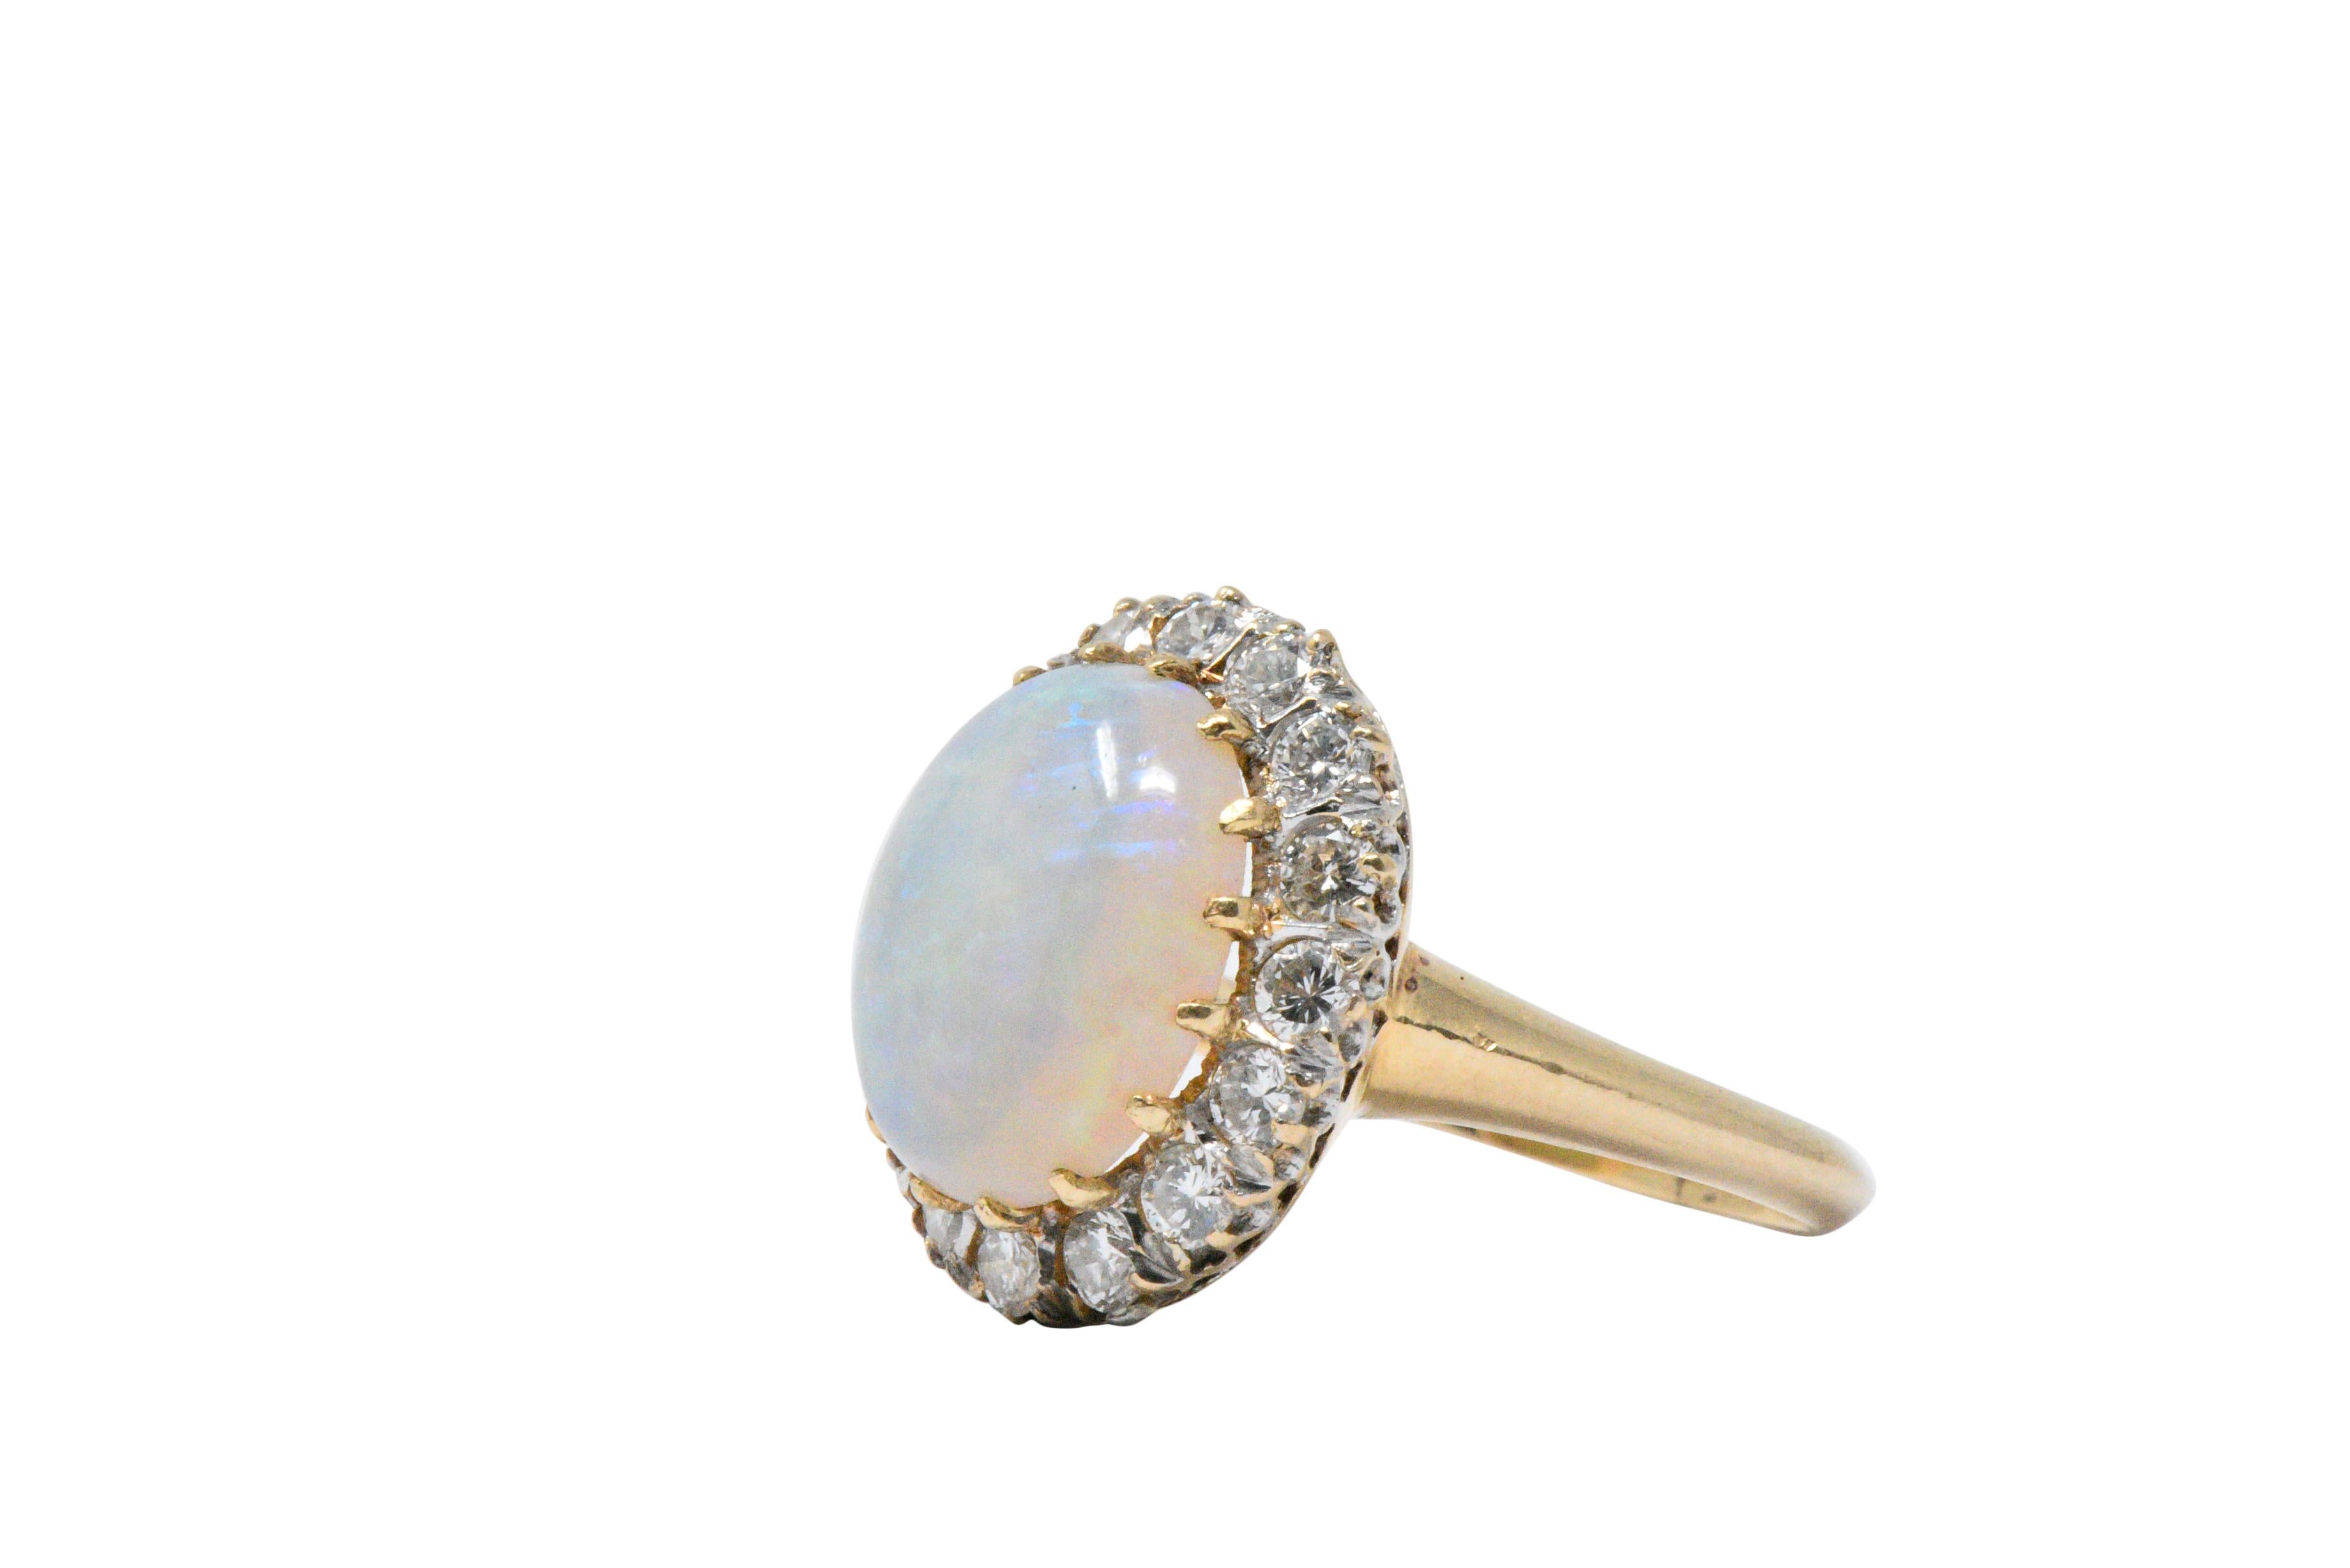 Centering an oval cabochon white opal, good play-of-color, mainly in the yellow, blue, violet and green, very good polish and luster with no signs of crazing

With a round brilliant cut diamond surround, approximately 0.65 carats total, G/H color